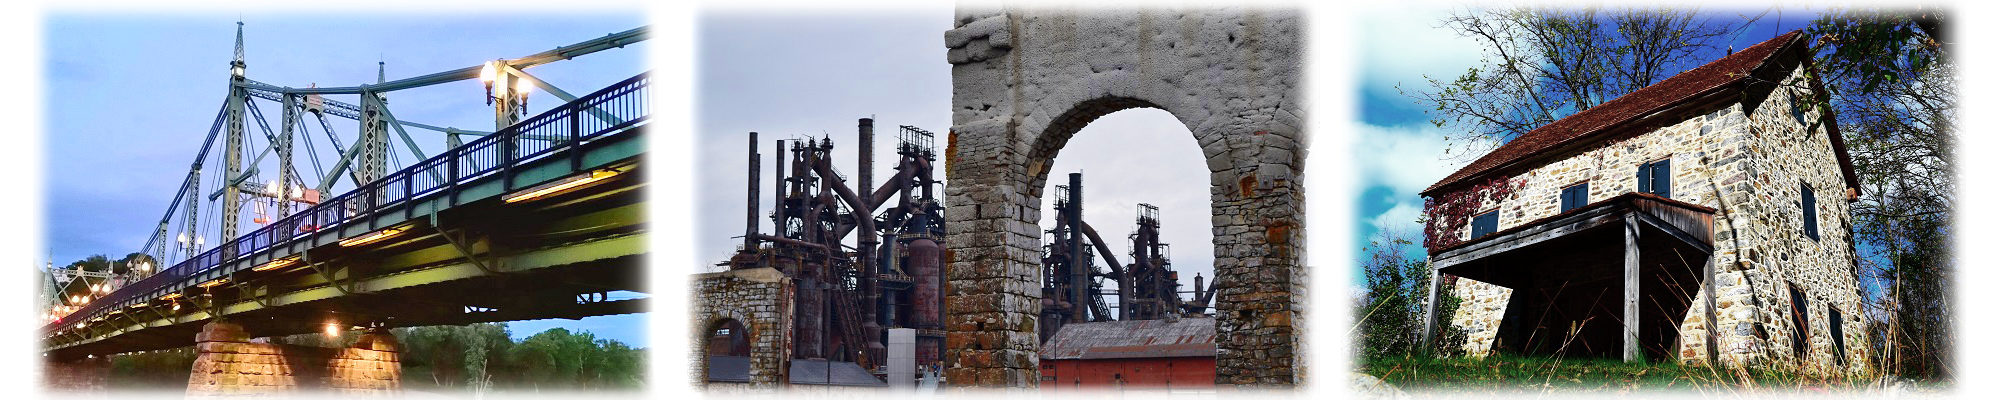 Banner collage with Easton-Phillipsburg Free Bridge, Bethlehem Steel blast furnaces viewed through stone archway, and old stone farmhouse